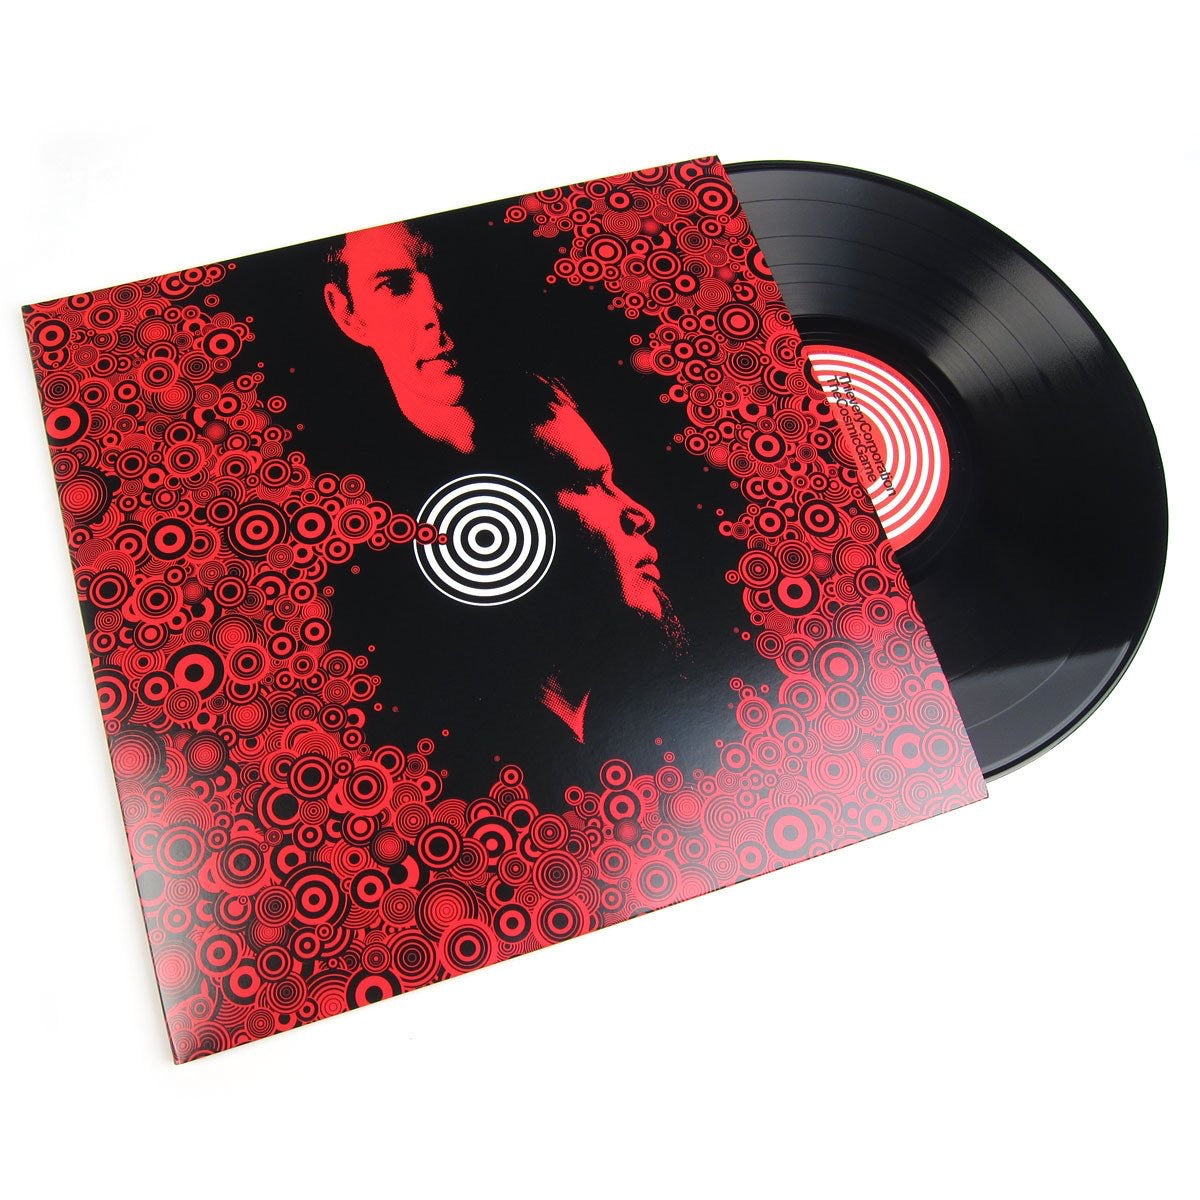 Thievery Corporation - The Cosmic Game (2LP Gatefold Sleeve)